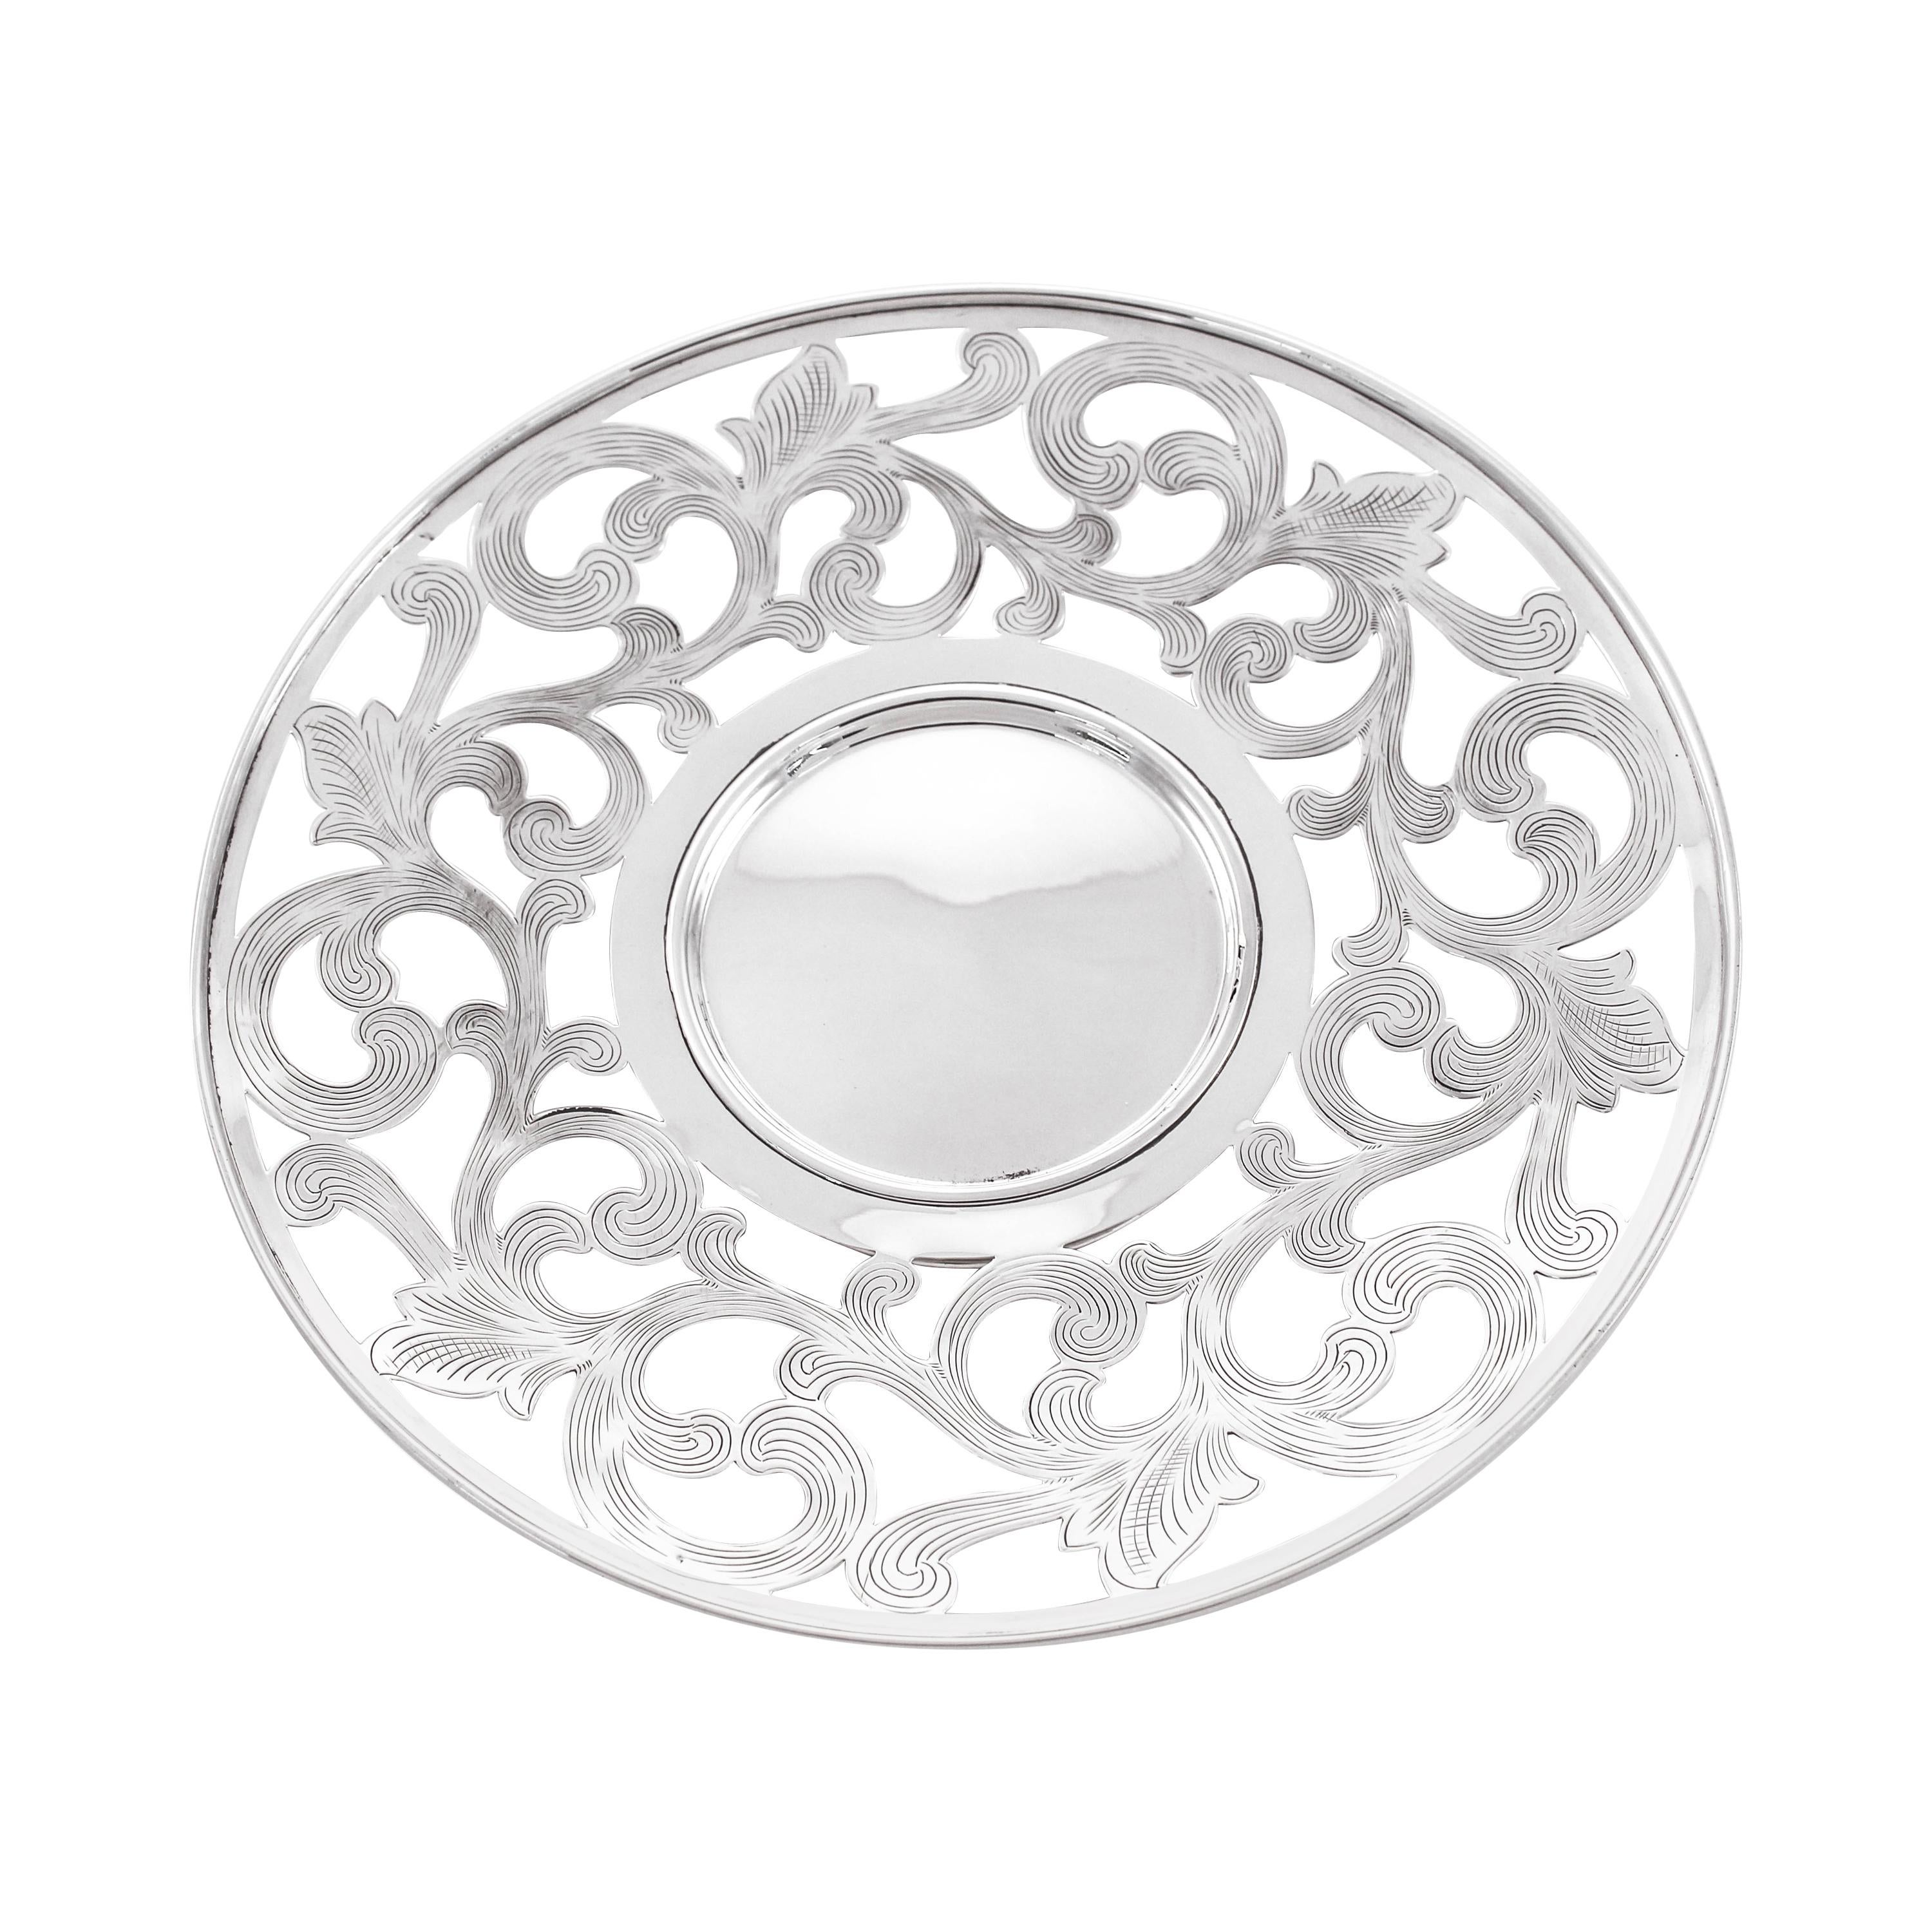 Tuttle Silver Company Platters and Serveware